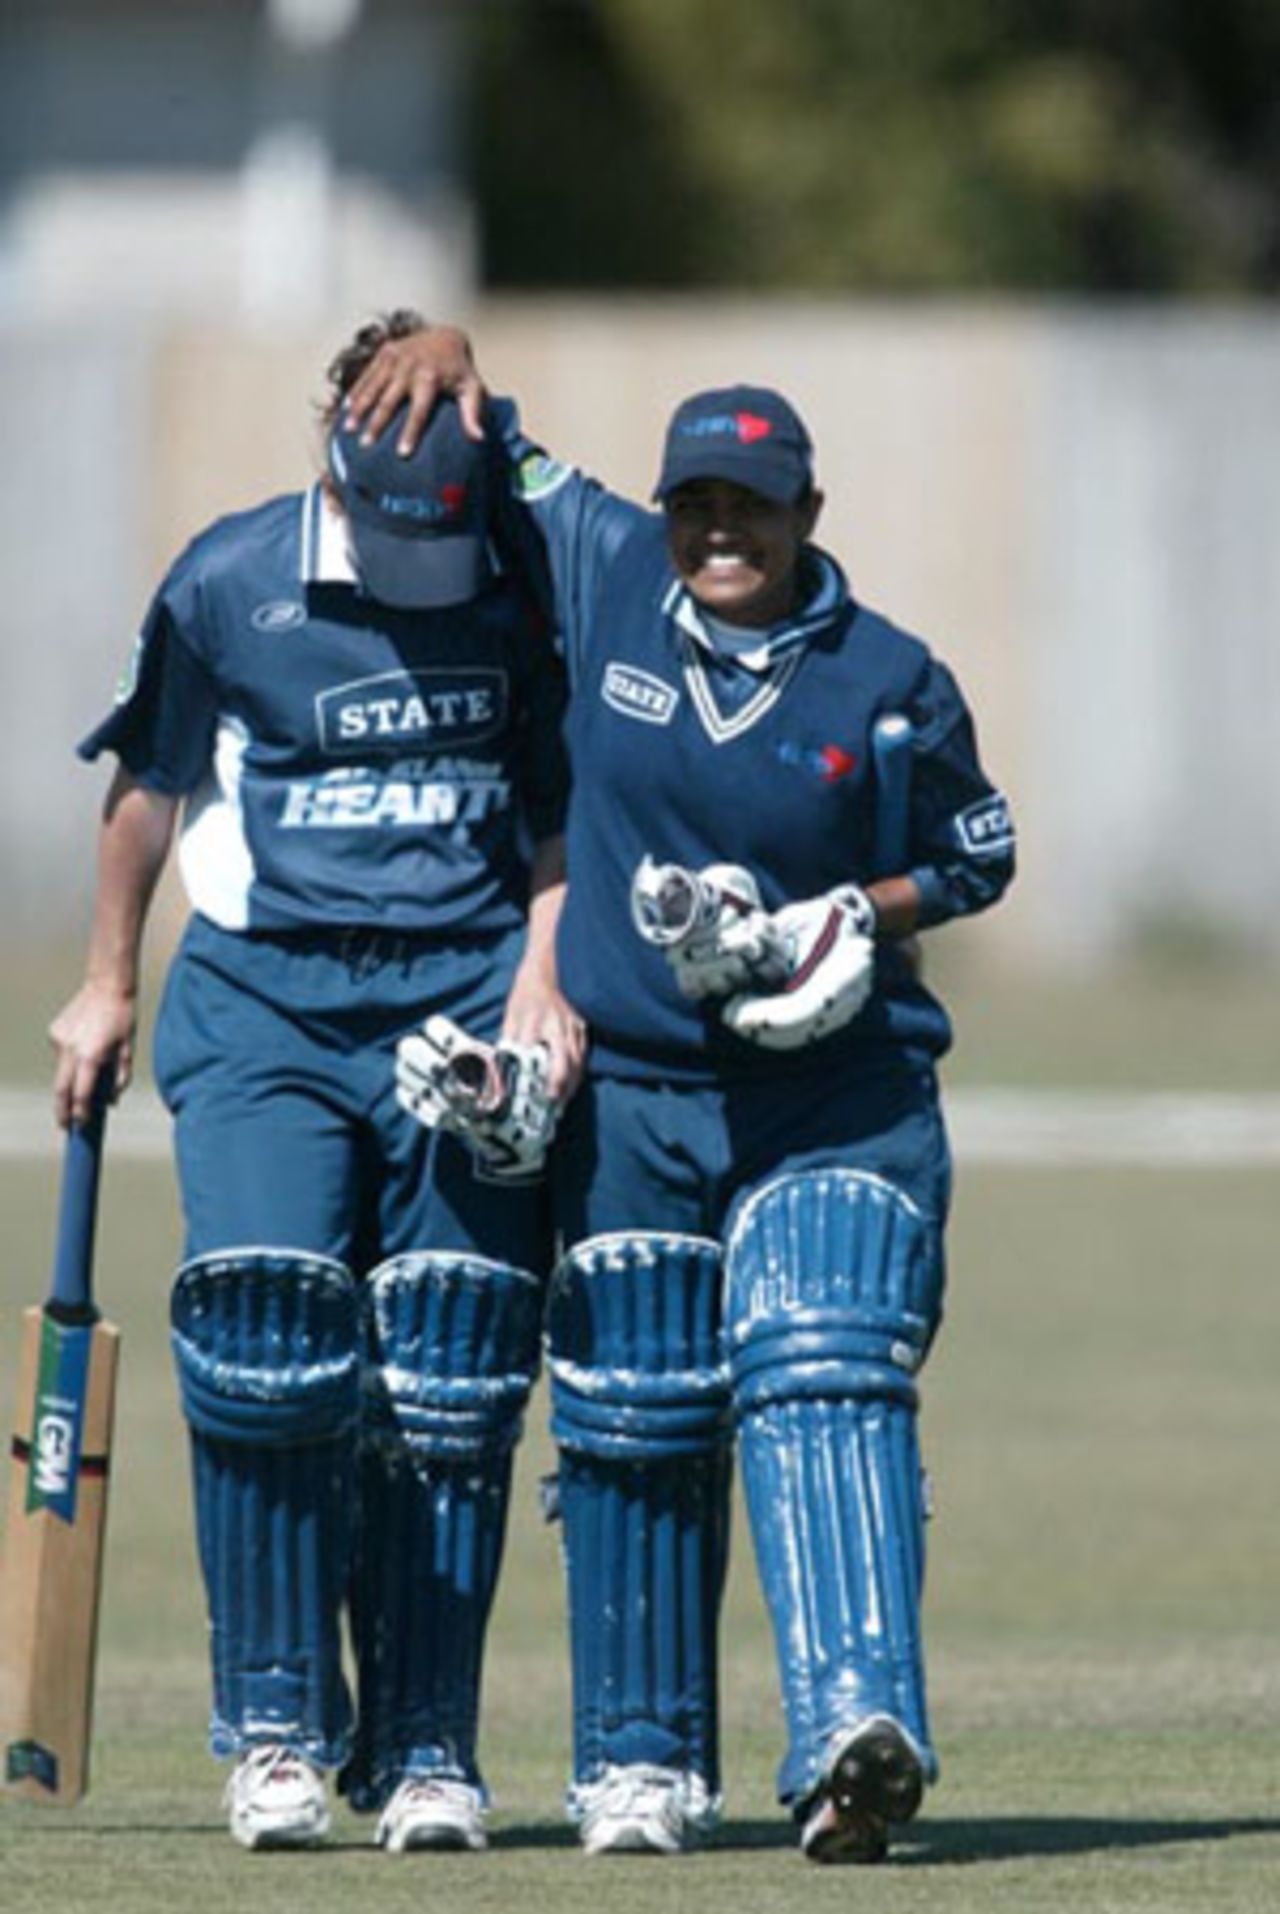 Auckland women's players Helen Watson (left) and Ana Soma leave the field at the end of the match after beating Canterbury by five wickets. State League Final: Canterbury Women v Auckland Women at Redwood Park, Christchurch, 22 February 2003.